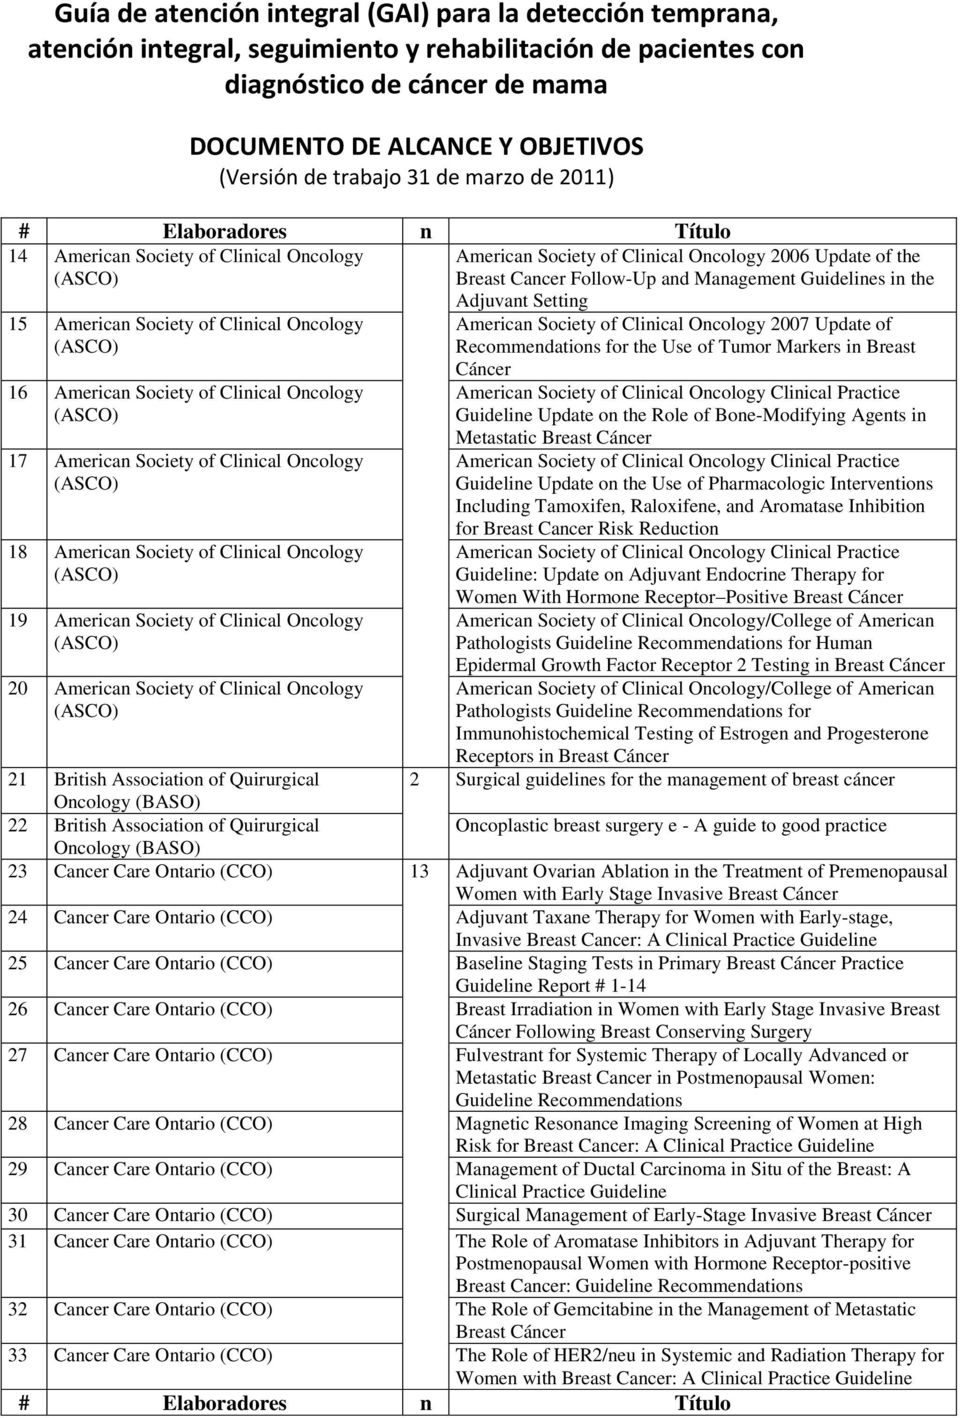 Society of Clinical Oncology Adjuvant Setting American Society of Clinical Oncology 2007 Update of Recommendations for the Use of Tumor Markers in Breast Cáncer American Society of Clinical Oncology